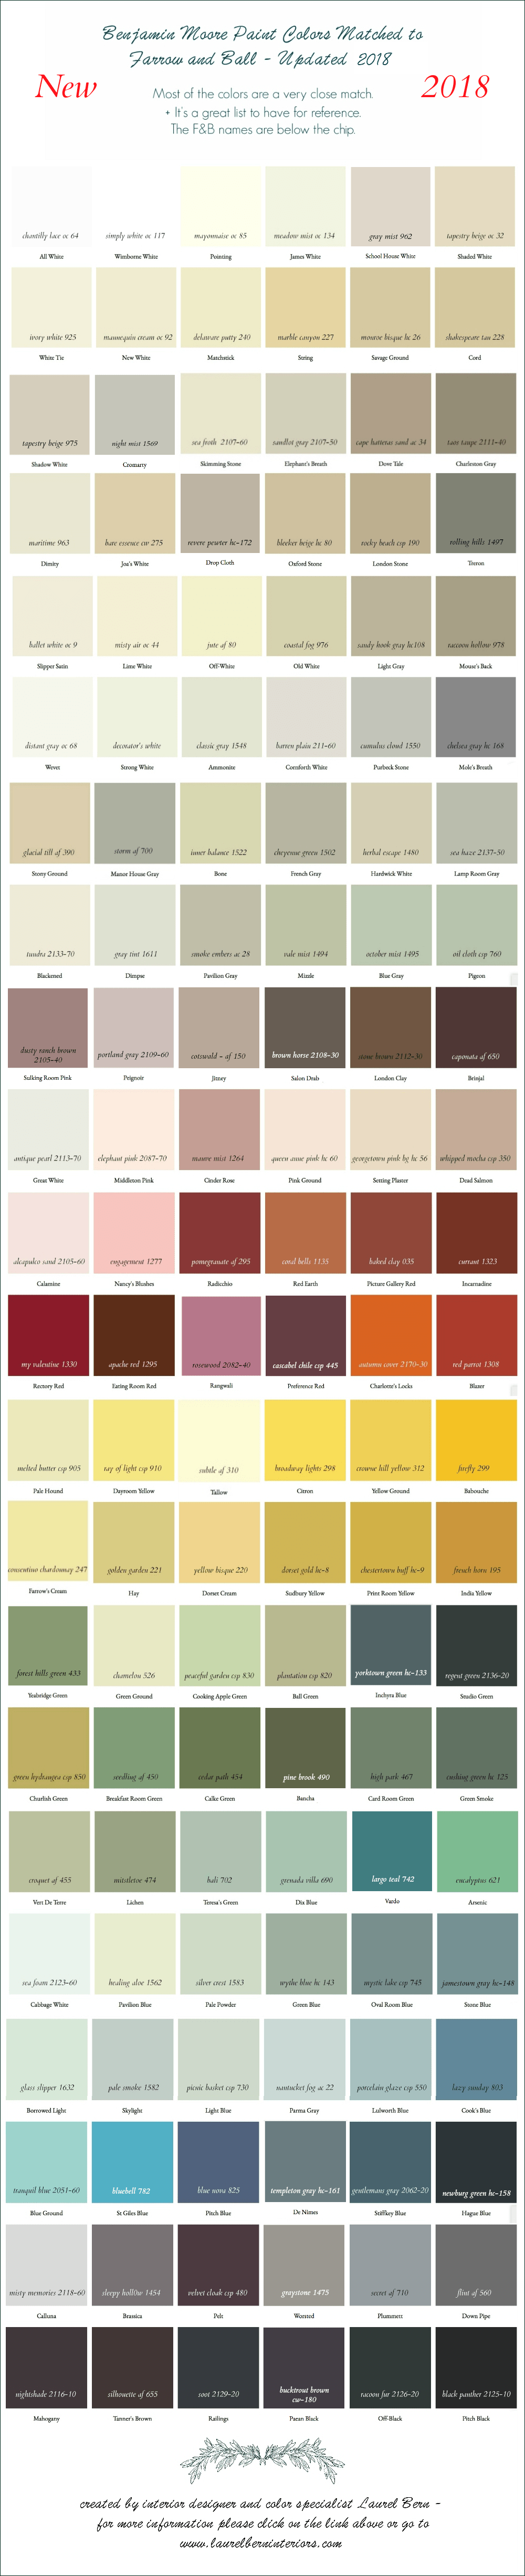 farrow and ball colors 2018 - benjamin moore matched 